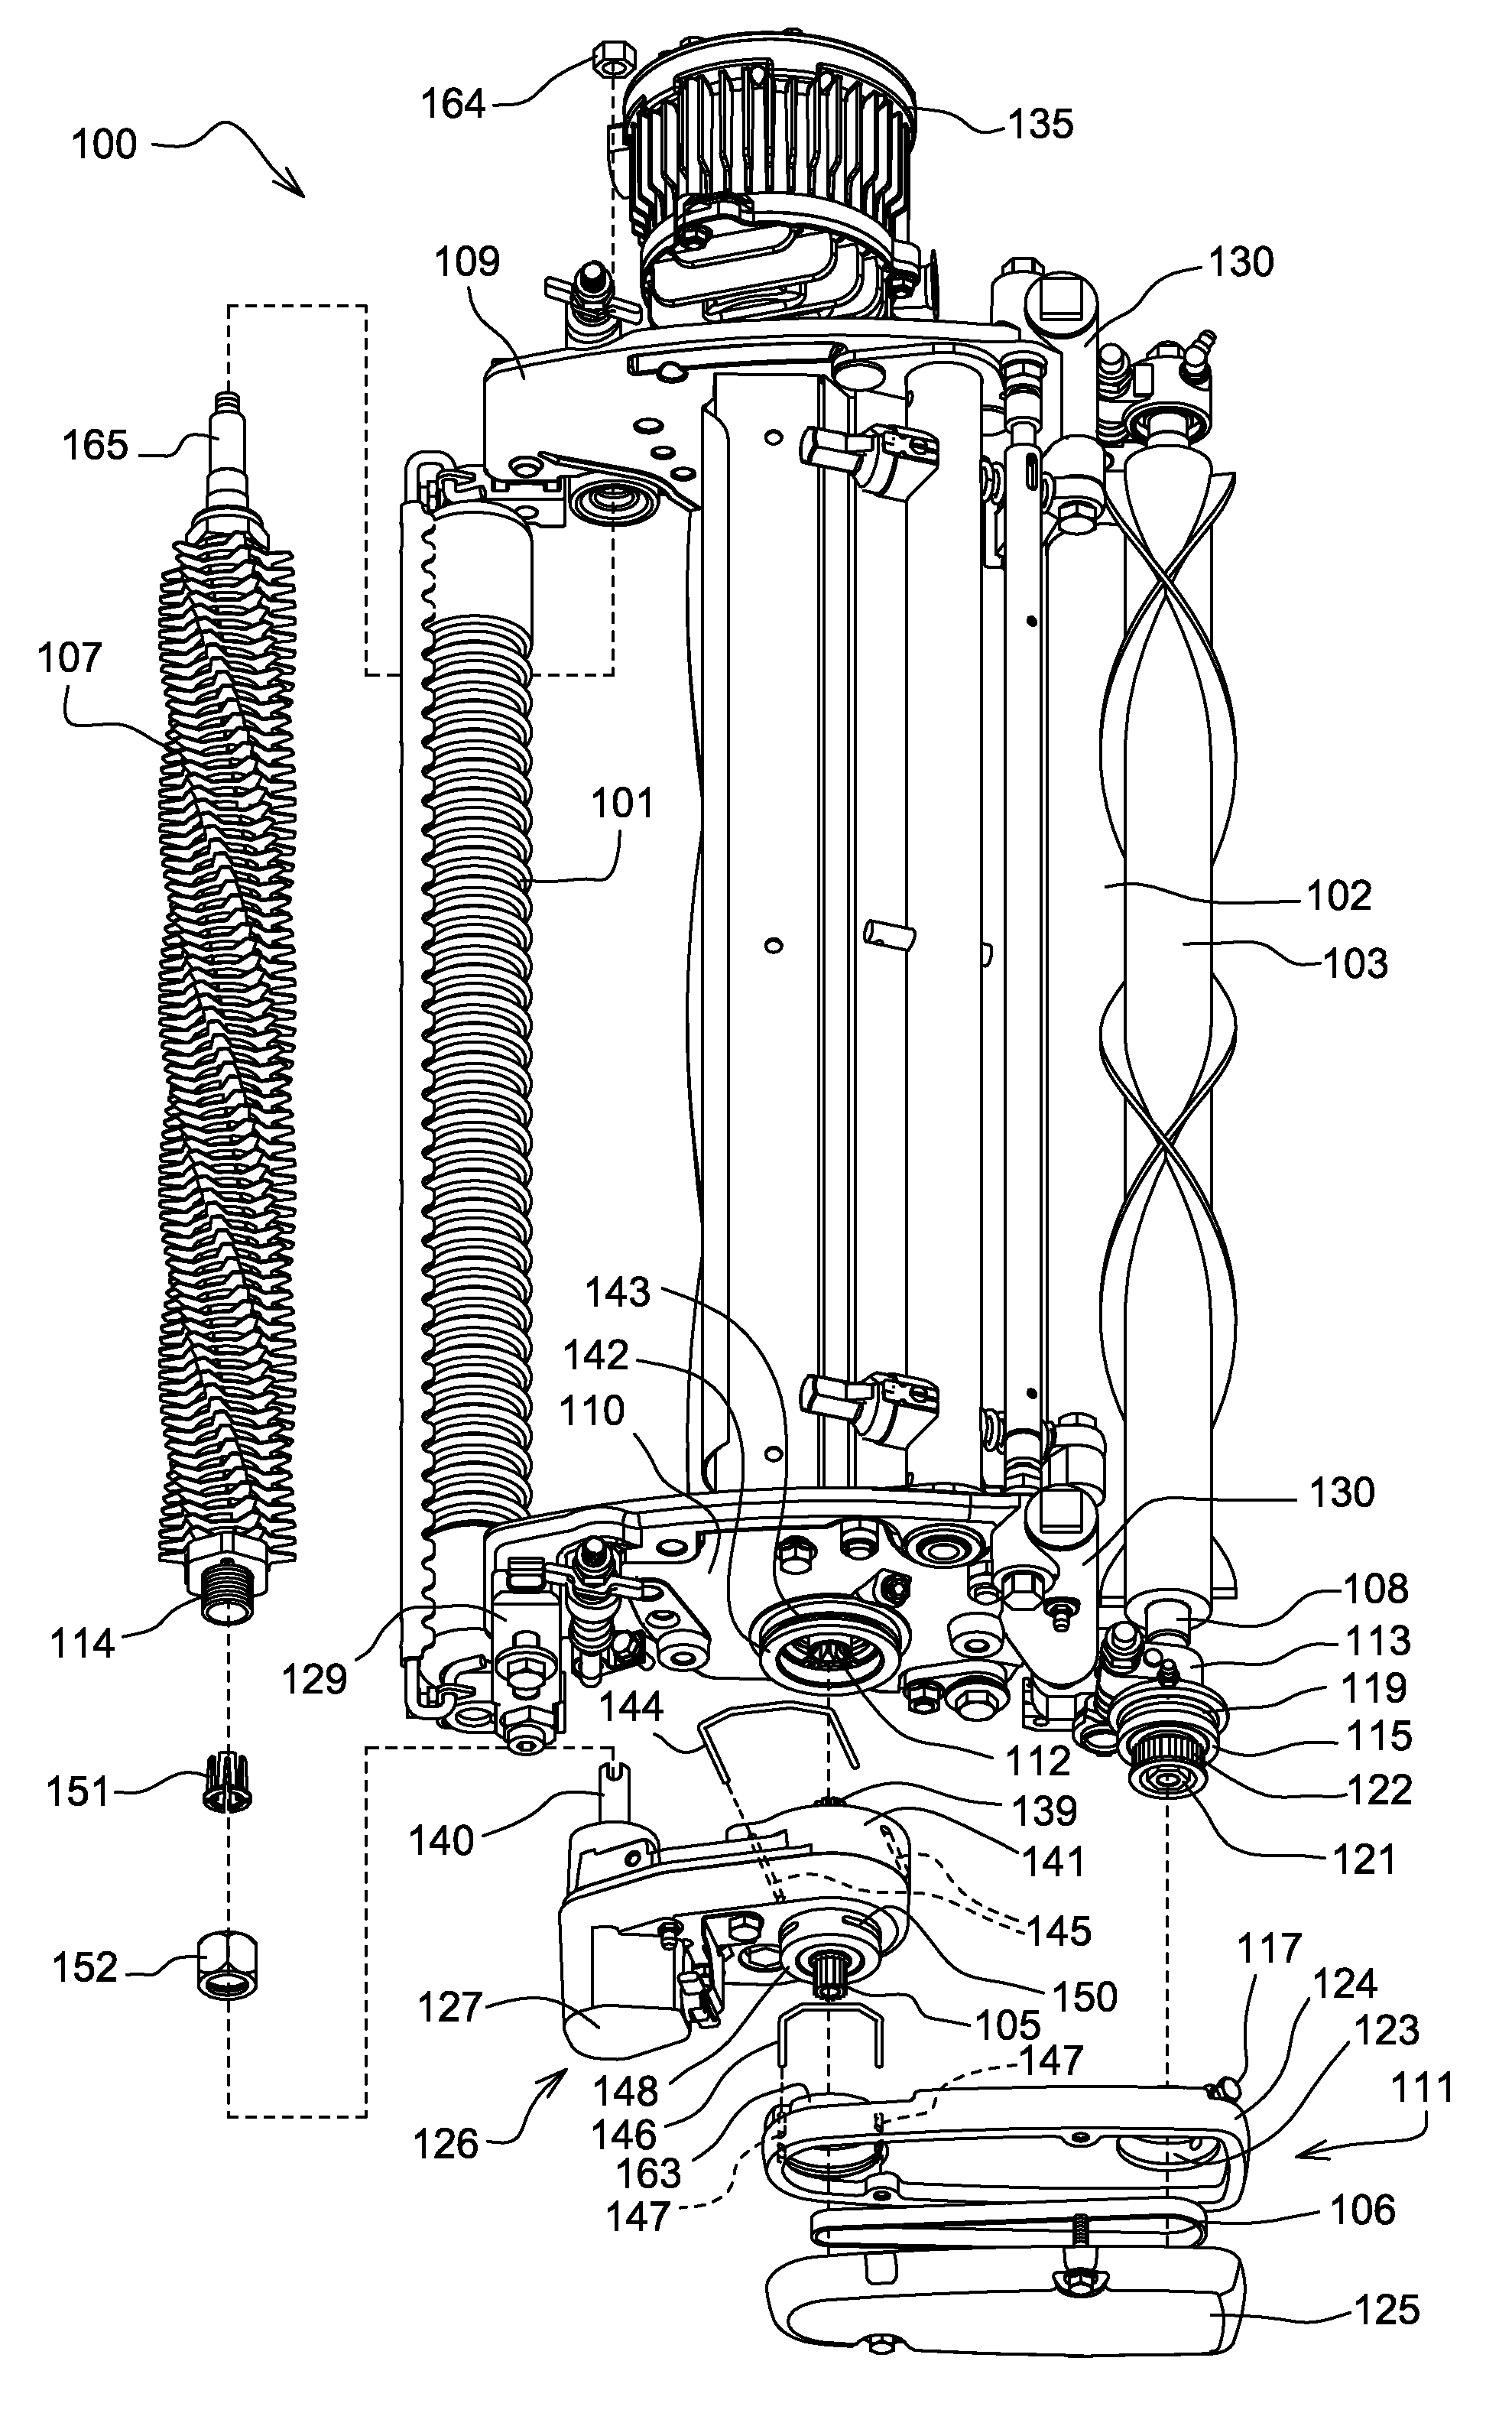 Auxiliary drive shaft connection on reel mower cutting unit